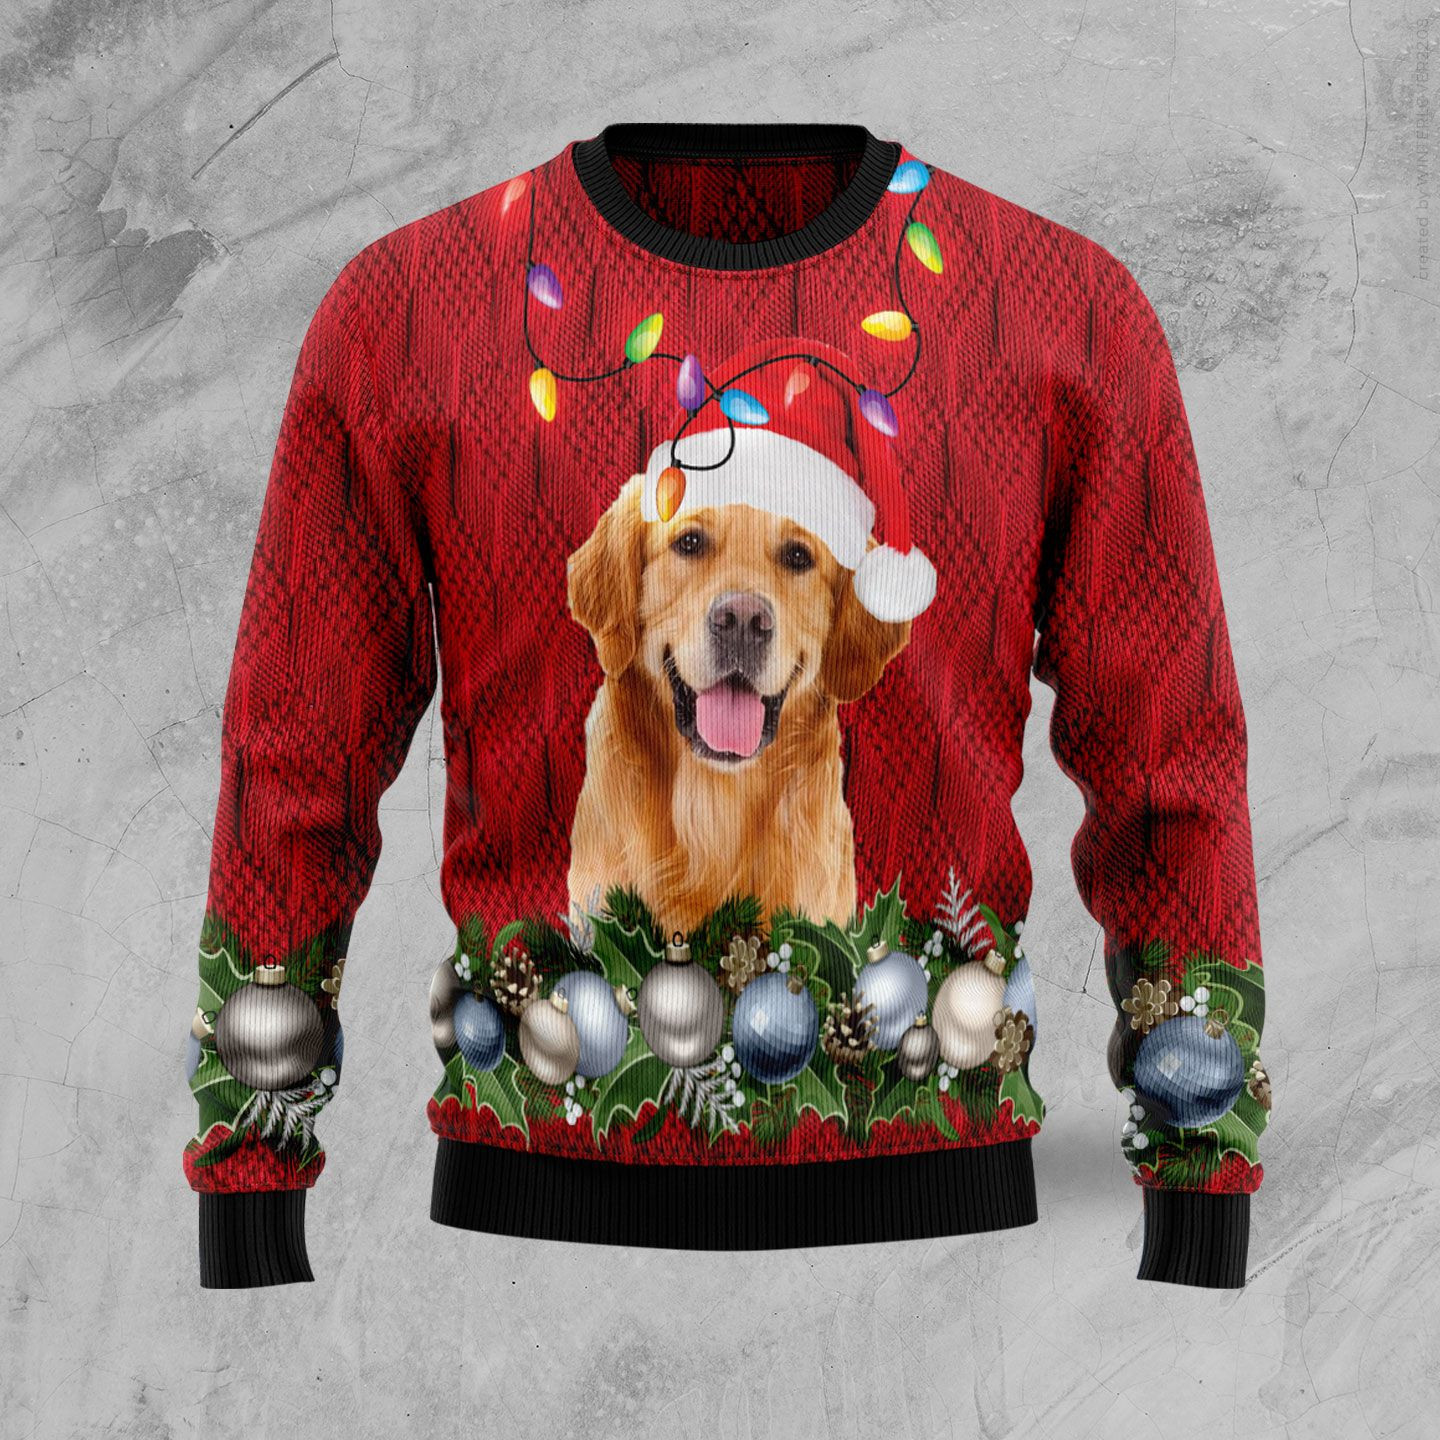 Golden Retriever Christmas Beauty Ugly Christmas Sweater Ugly Sweater For Men Women, Holiday Sweater